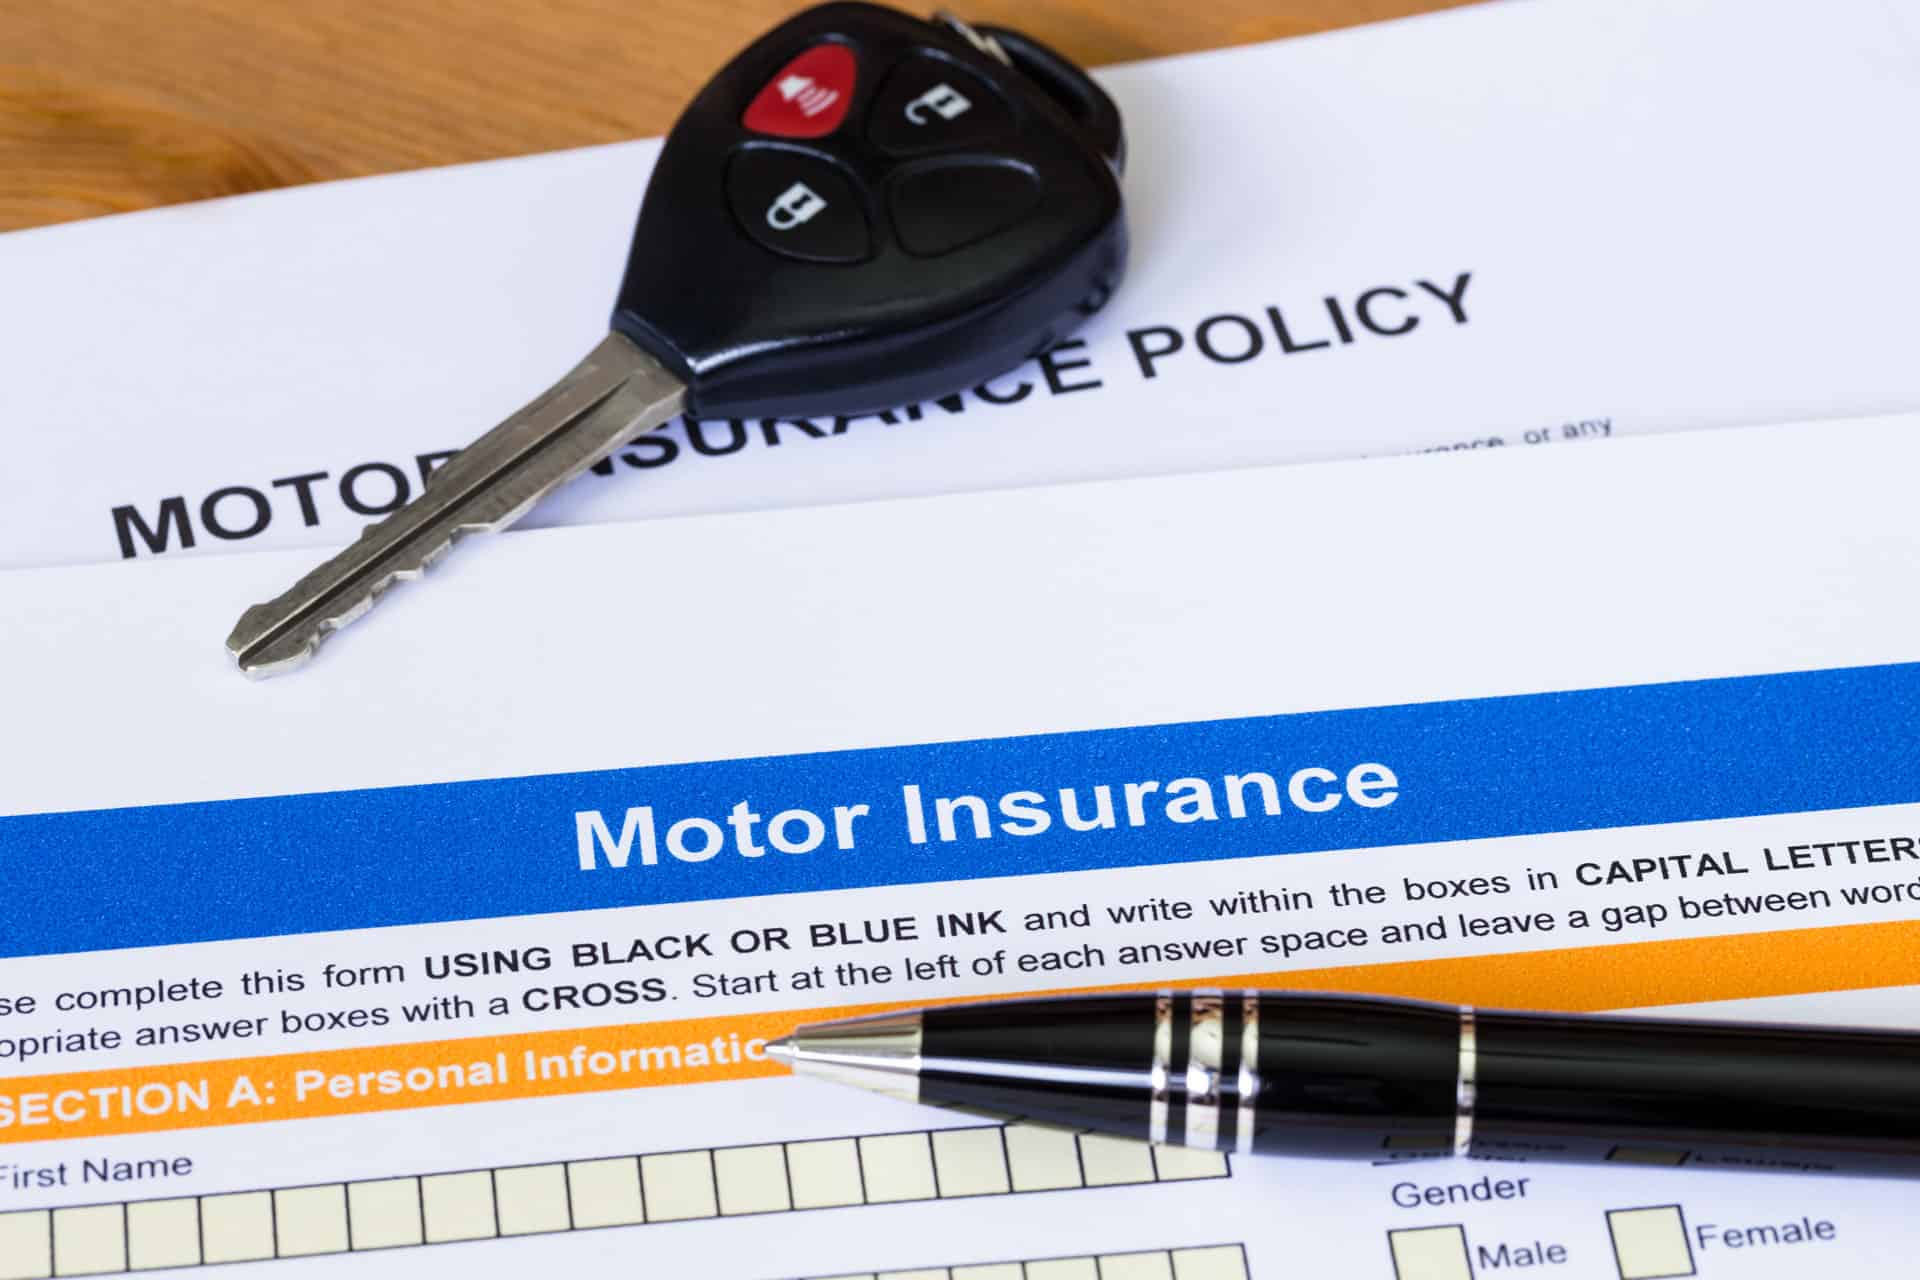 Why have motor insurance premiums increased so much?